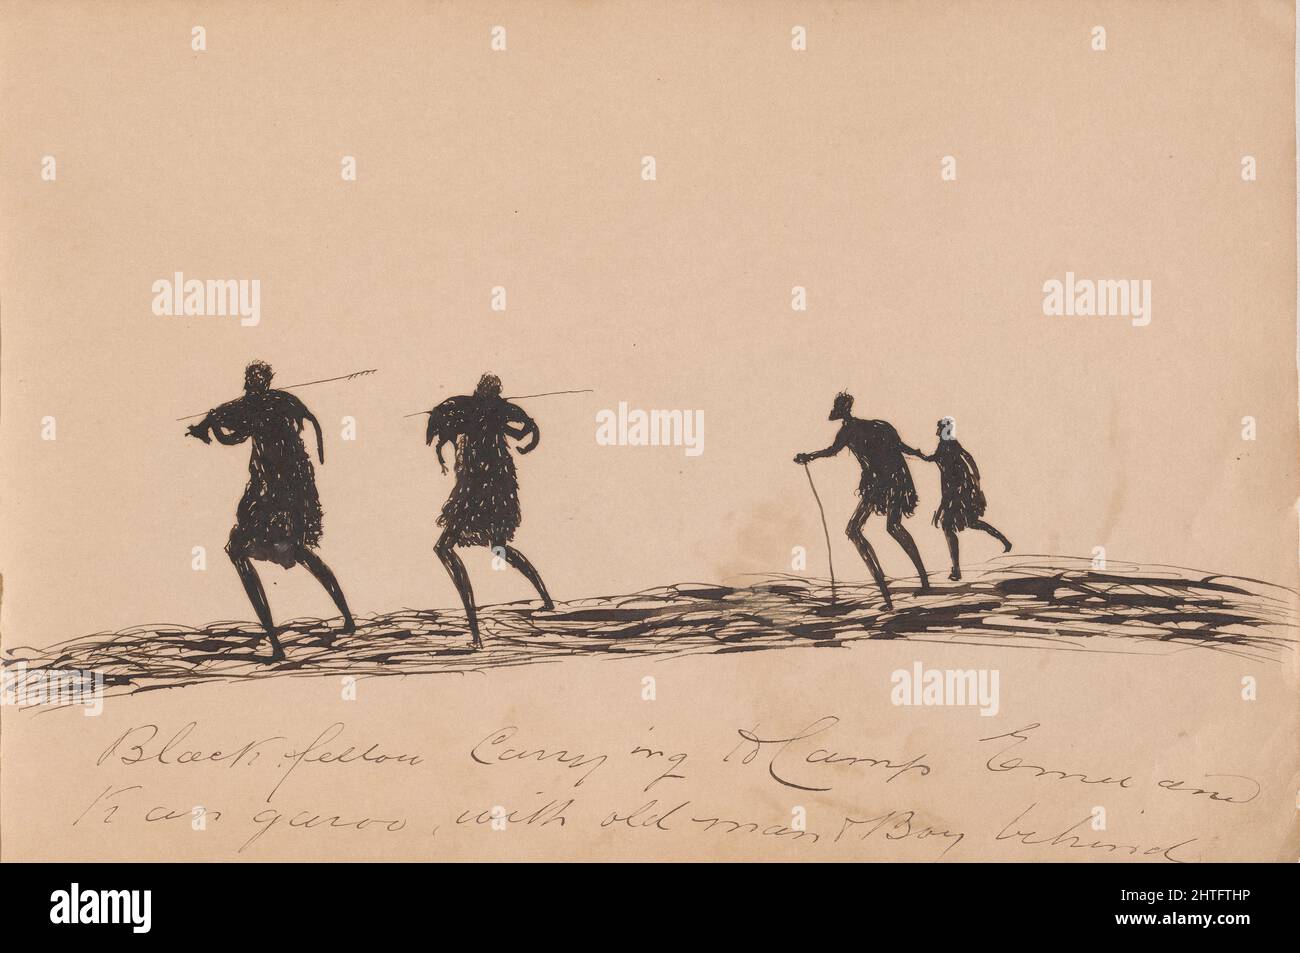 Tommy McRAE - Kwatkwat people - Black fellow carrying to camp emu and kangaroo with old man and boy behind-Sketchbook of Aboriginal ... Stock Photo